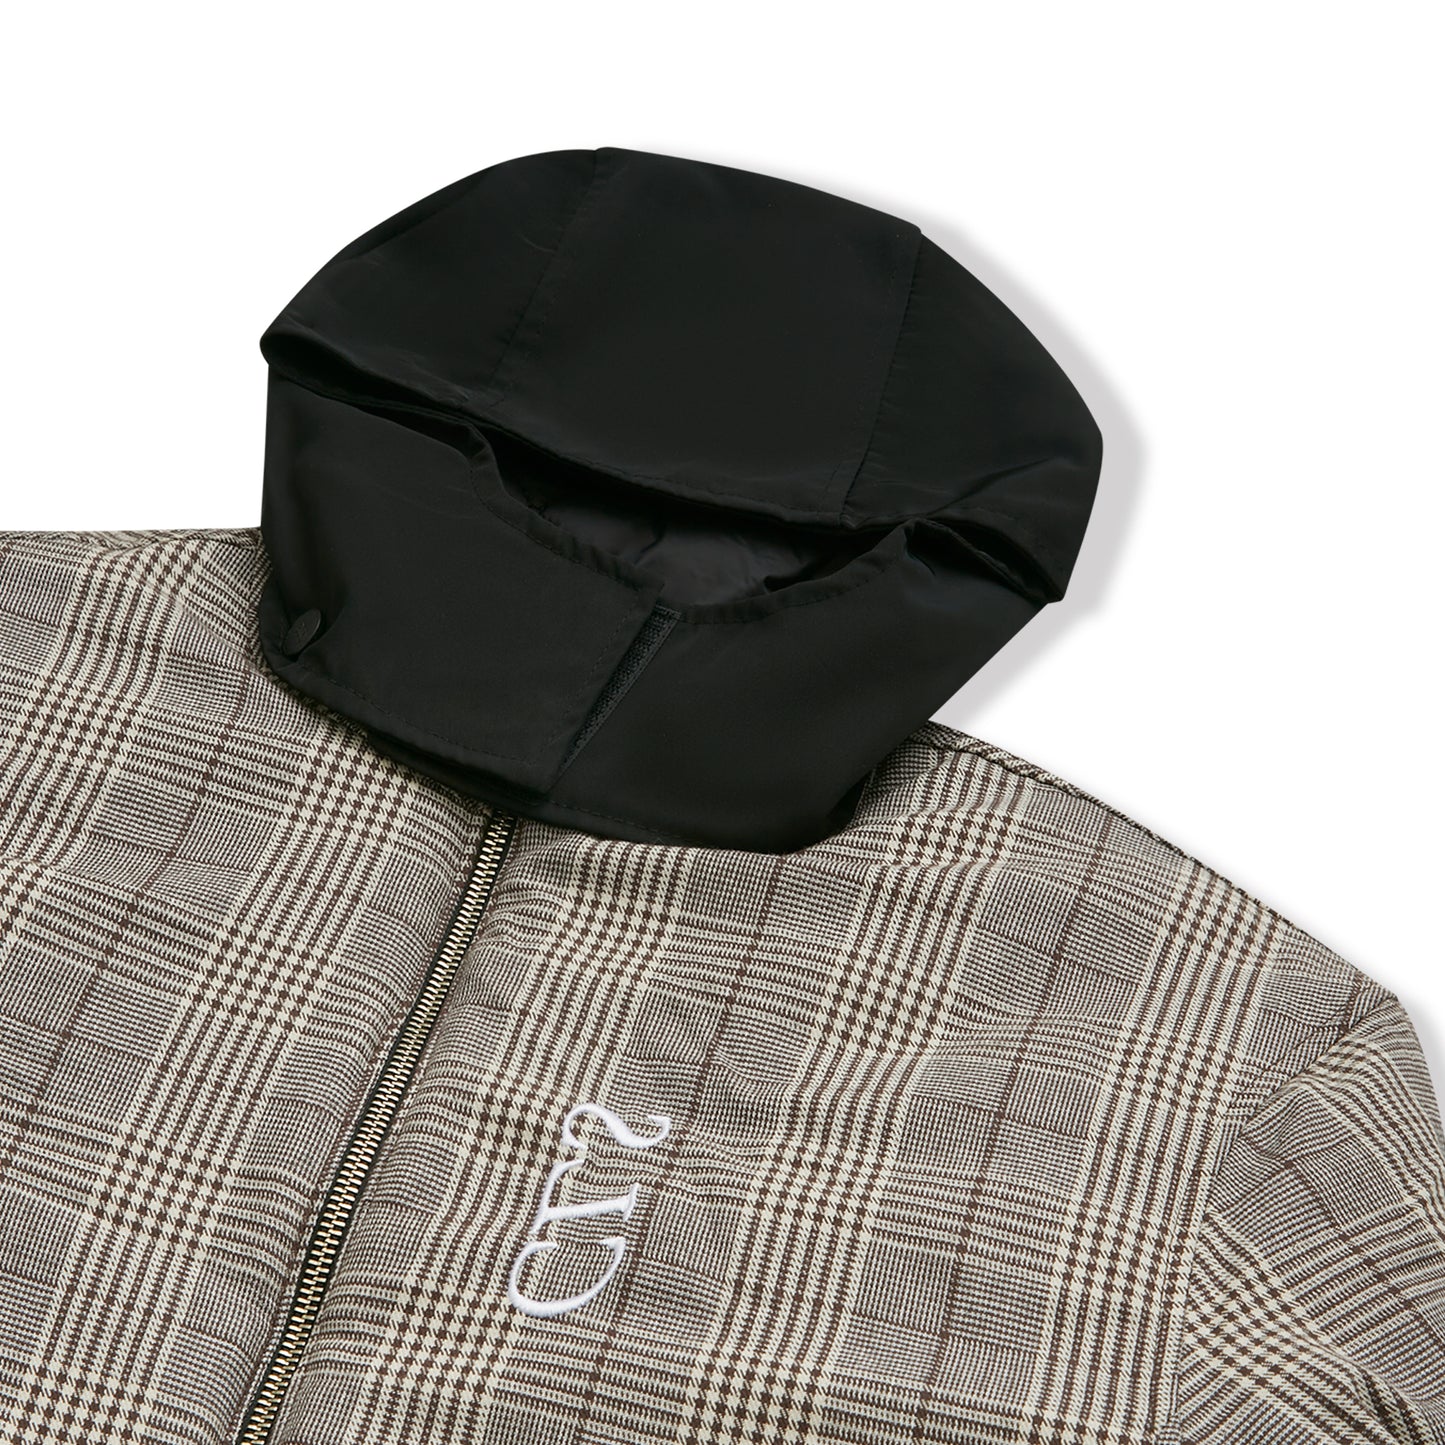 PUFFER JACKET CLASS "DOUBLE FACE" PLAID